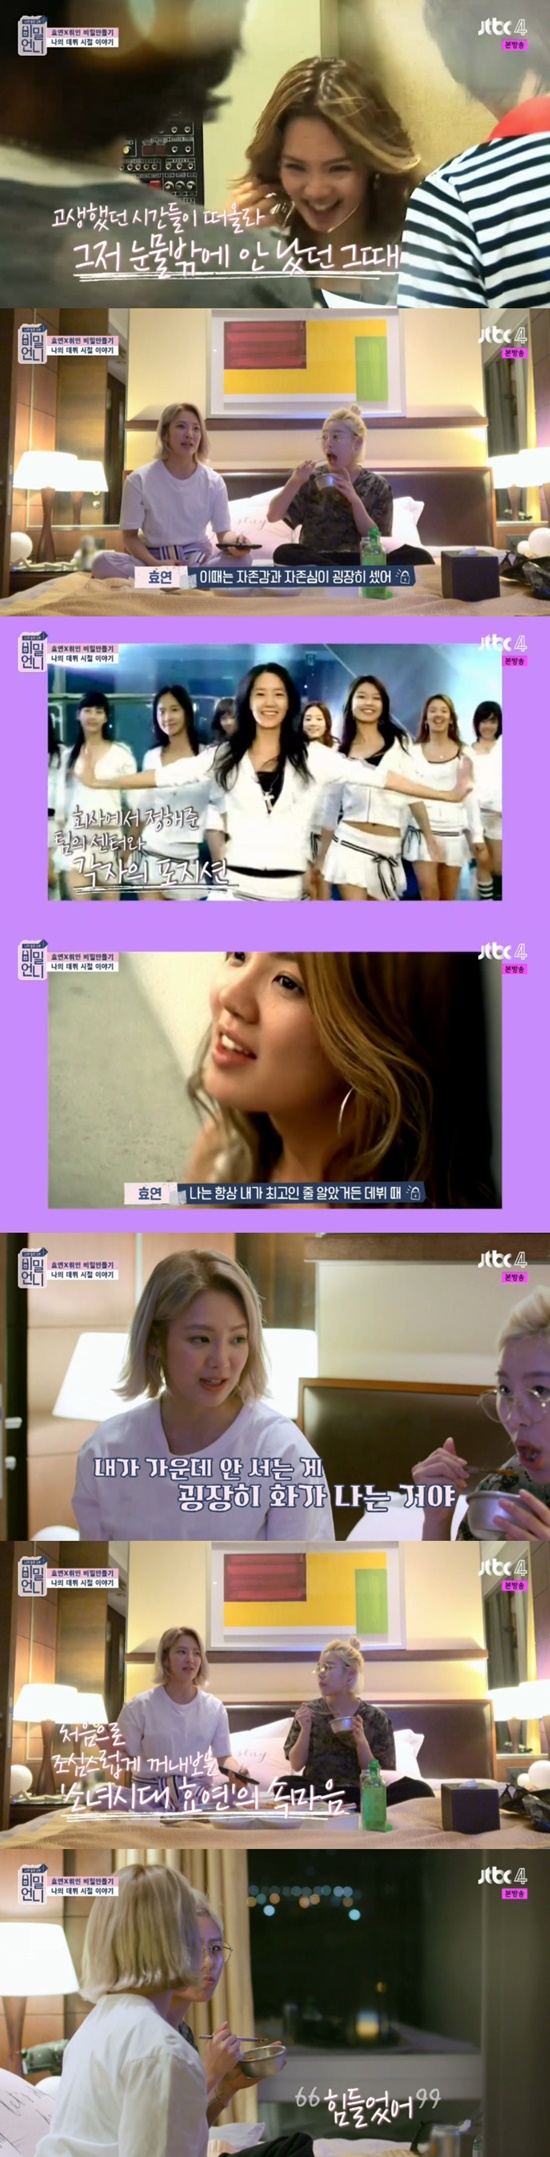 Group Girls Generation Hyoyeon reveals candid heart at debutOn the first day of JTBC4 Secret Sister, Hyoyeon and Wheein talked about their debut times.I had a long Idol producer period and dreamed of a lot of debut, so I cried a lot during debut, Hyoyeon said.Hyoyeon said: But I knew before debut I was the best.However, debut, the companys big picture was visual and the tall Im Yoon-ah was the center, he said. At that time, it was hard to accept that I was not the center. He then added: So it was a lot of hard work, but I thought someday there would be people who would look after me even if I was on the side. / Photo = JTBC4